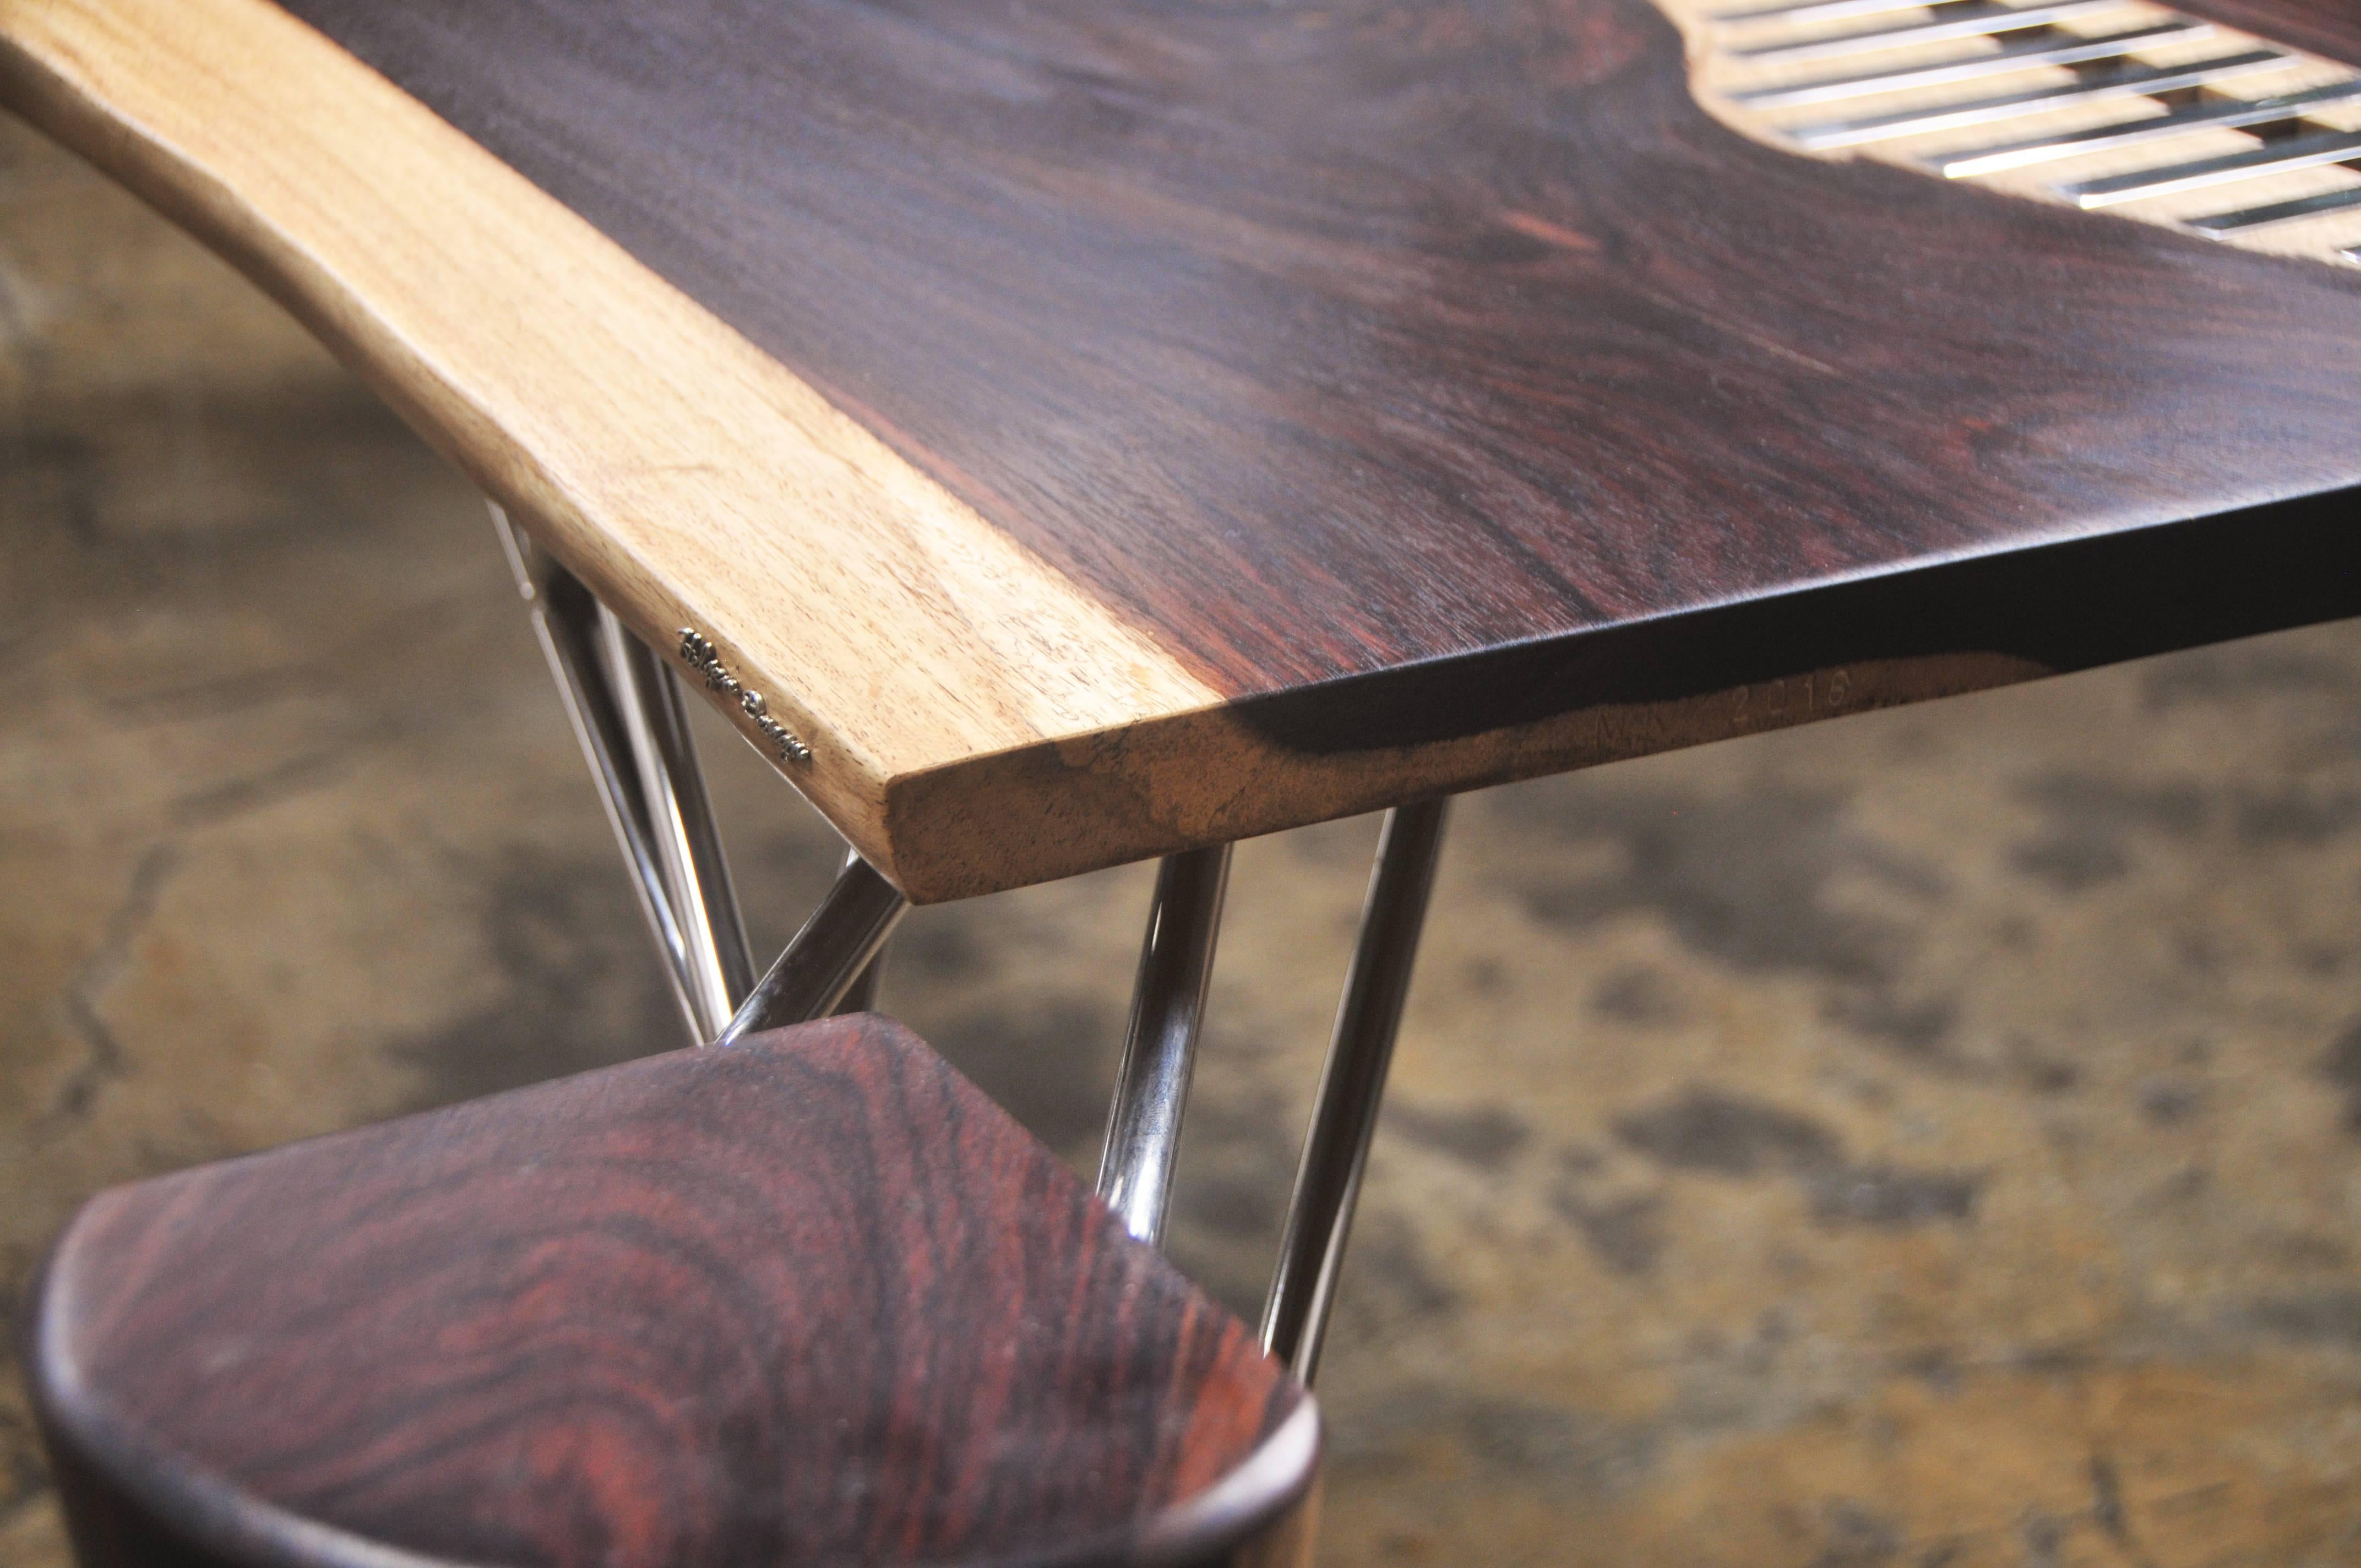 Hand-Crafted Mahakam Table One of a Kind Made of Rosewood and Mirror Polished Stainless Steel